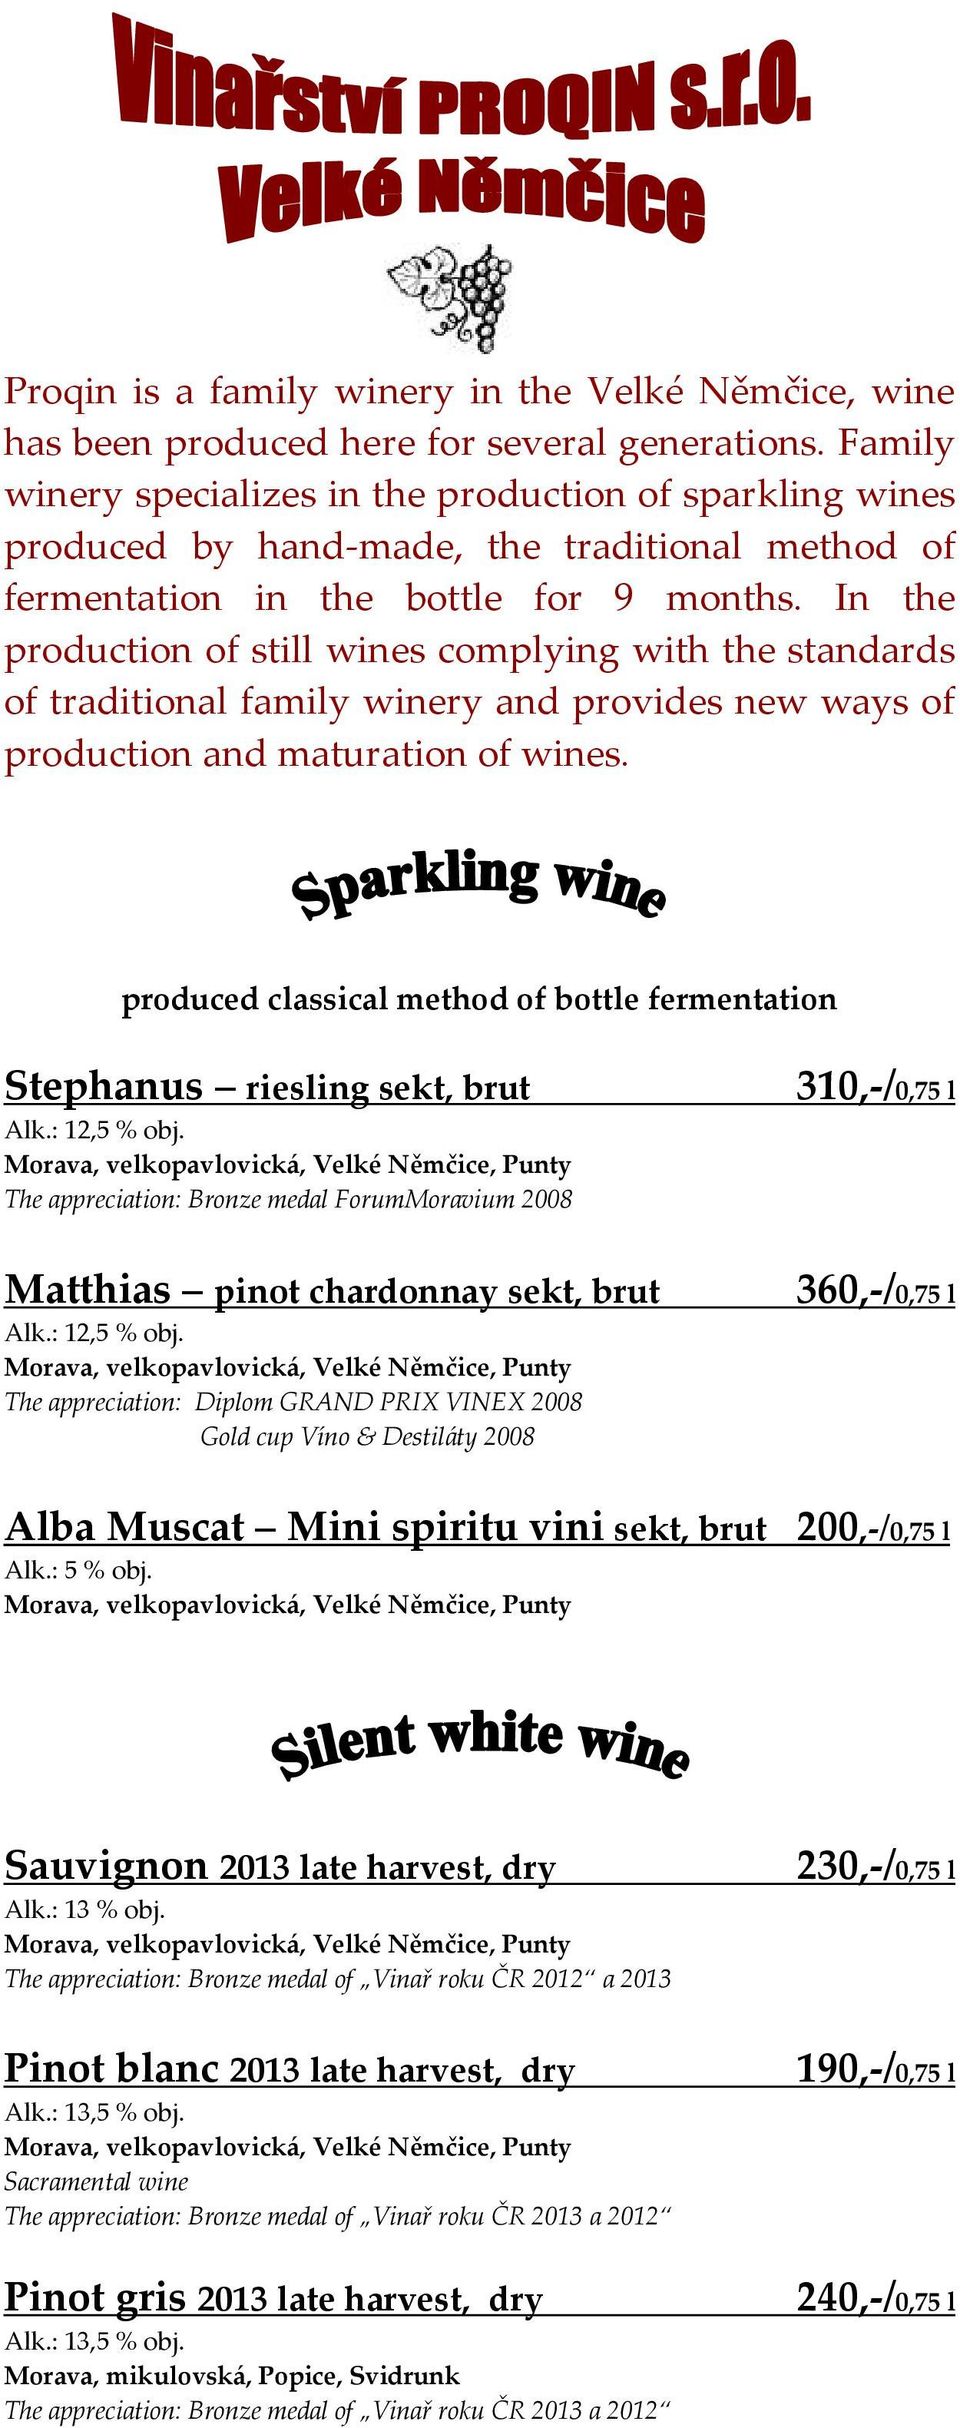 In the production of still wines complying with the standards of traditional family winery and provides new ways of production and maturation of wines.